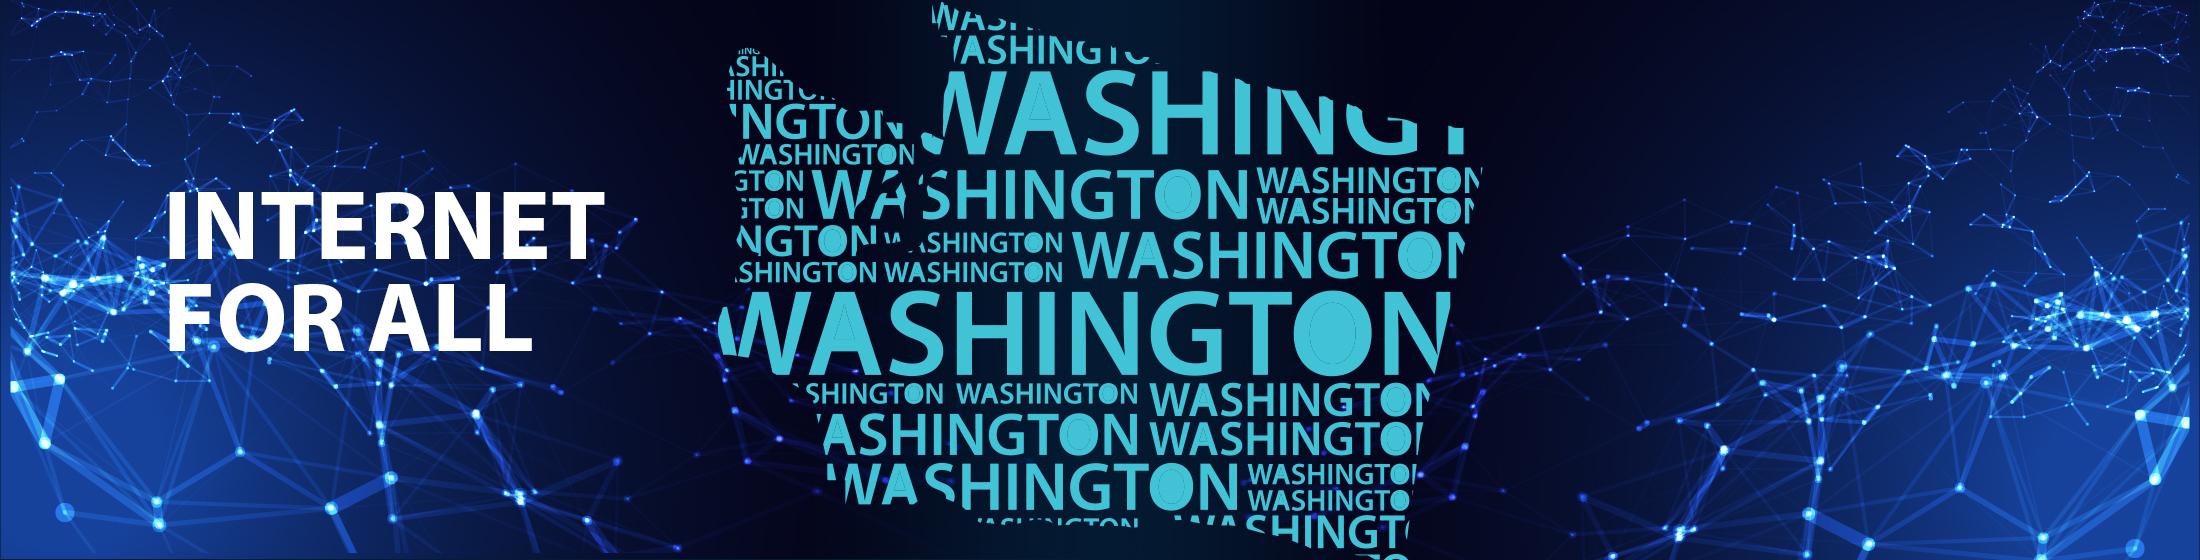 Graphic image show an outline of Washington state with text: Internet for all